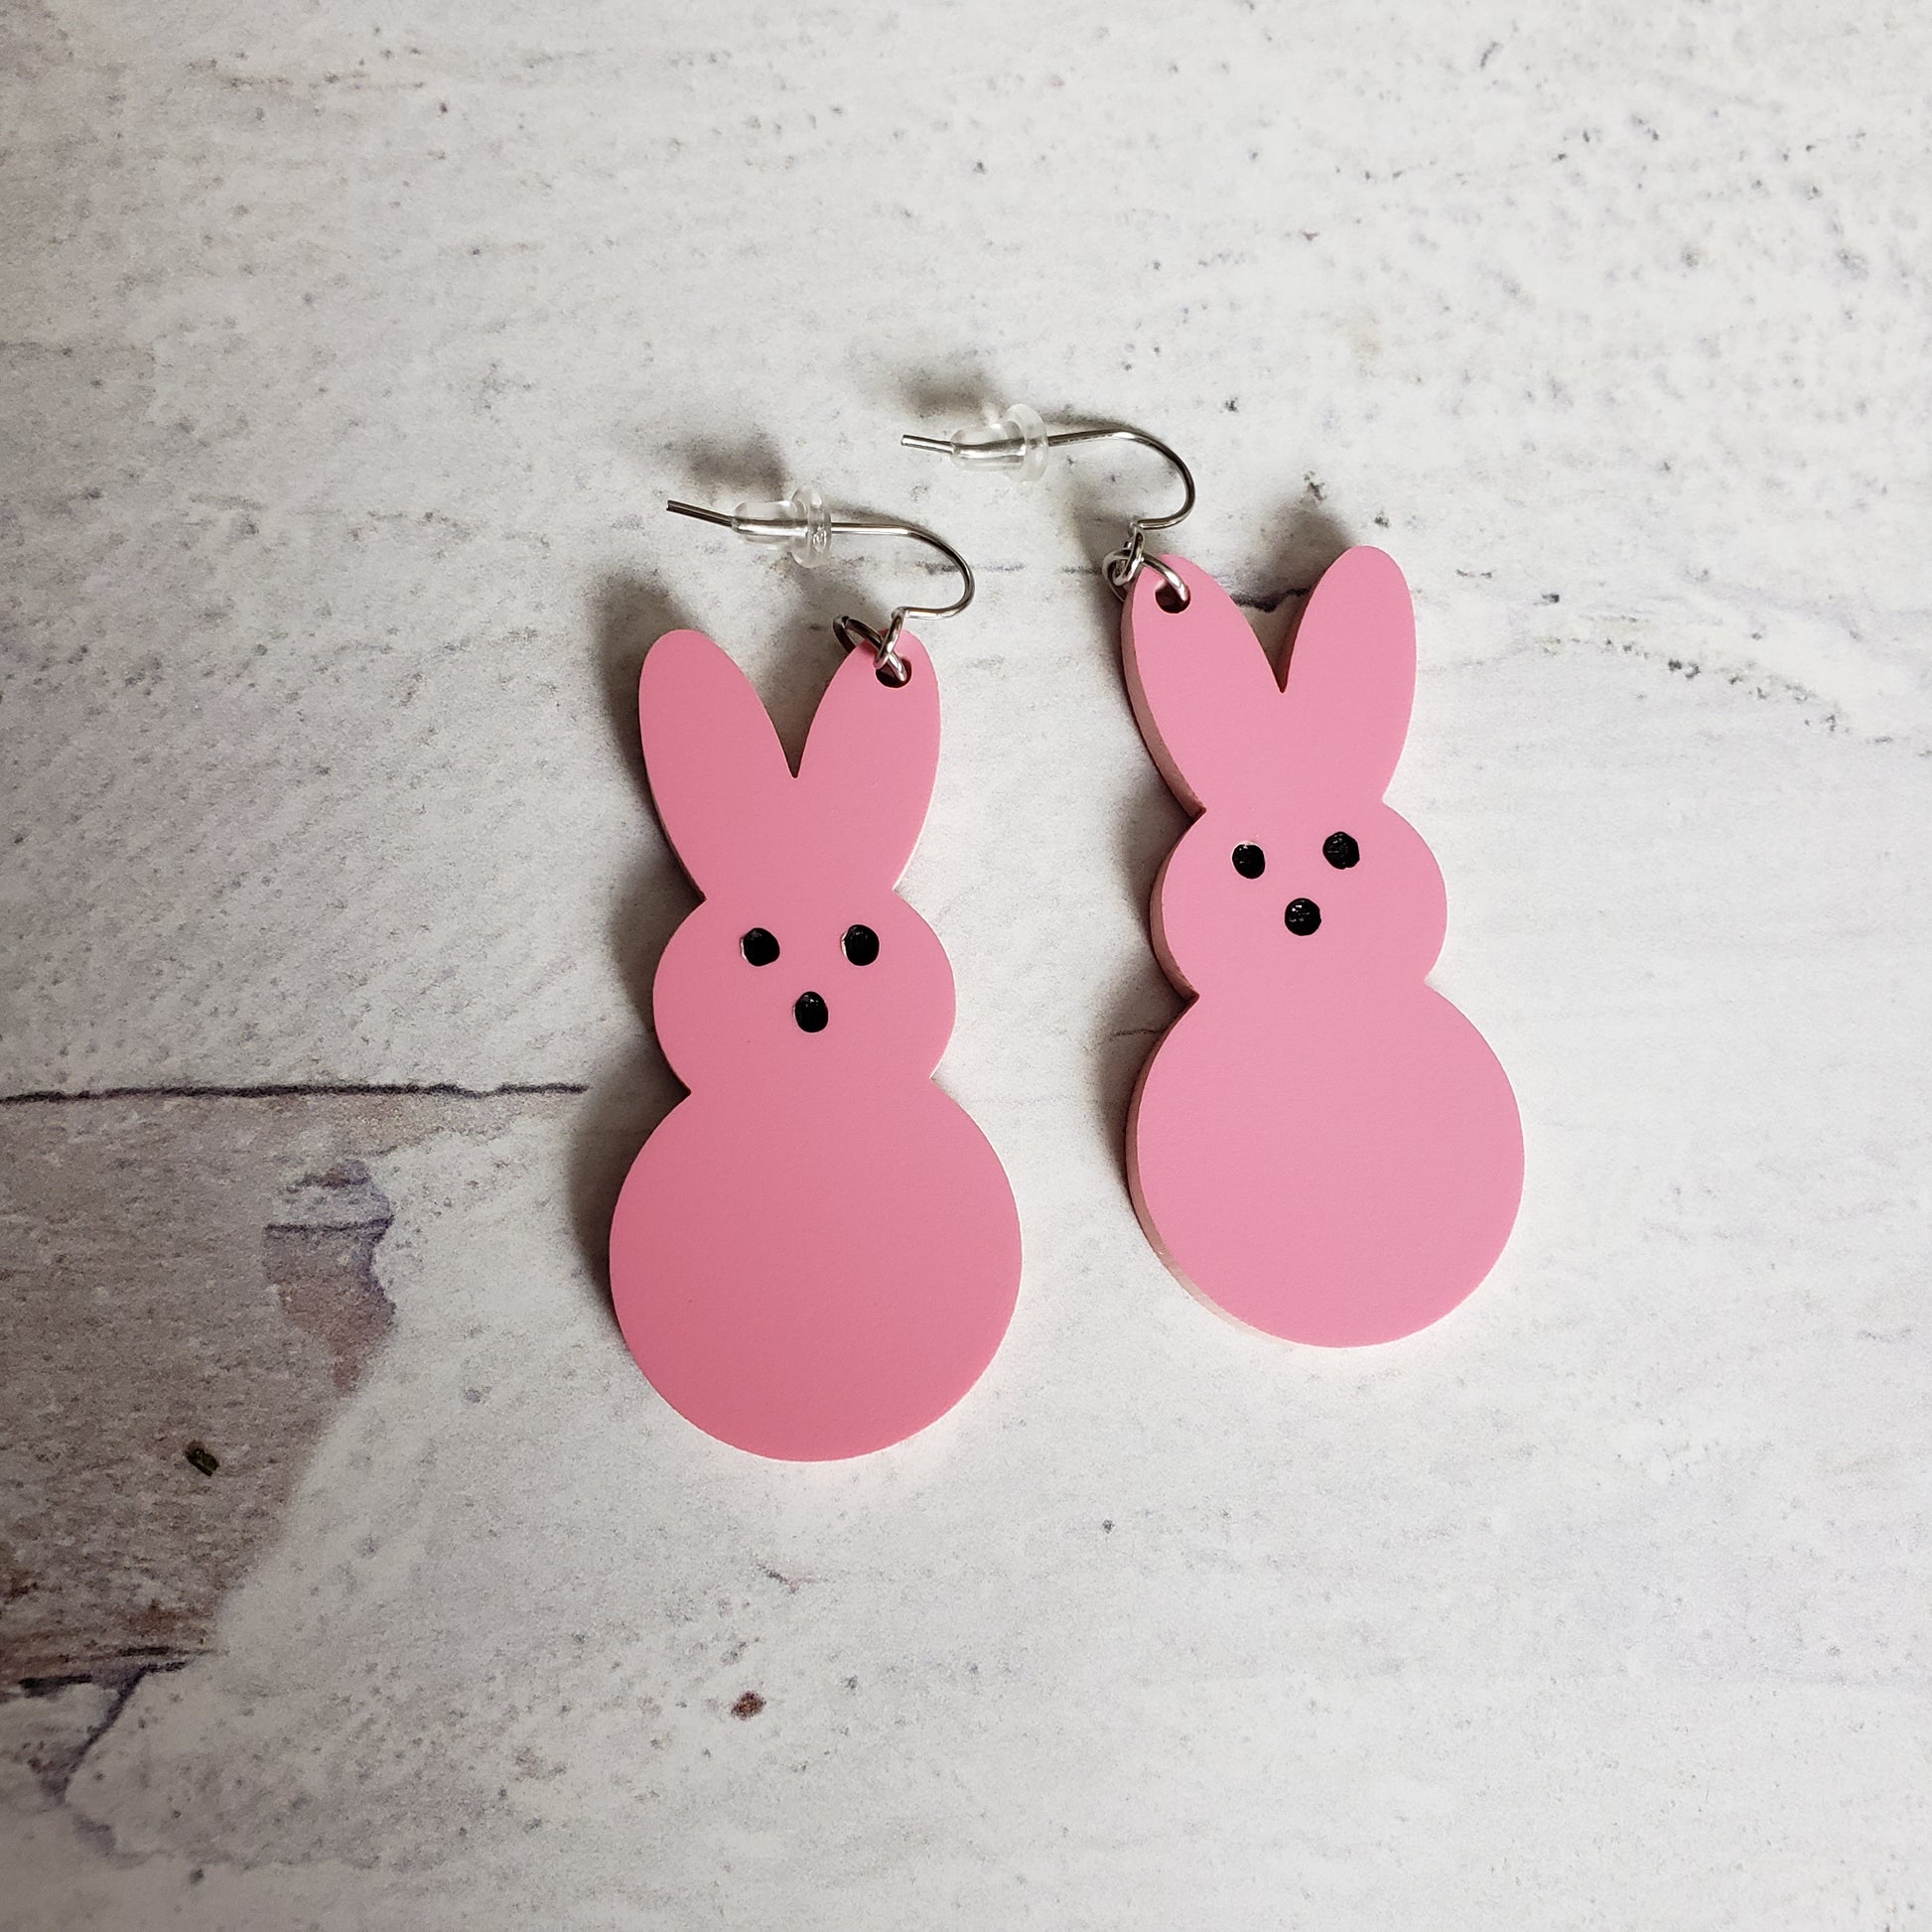 Matte Pink Marshmallow Bunny Earrings on stainless earring wires.